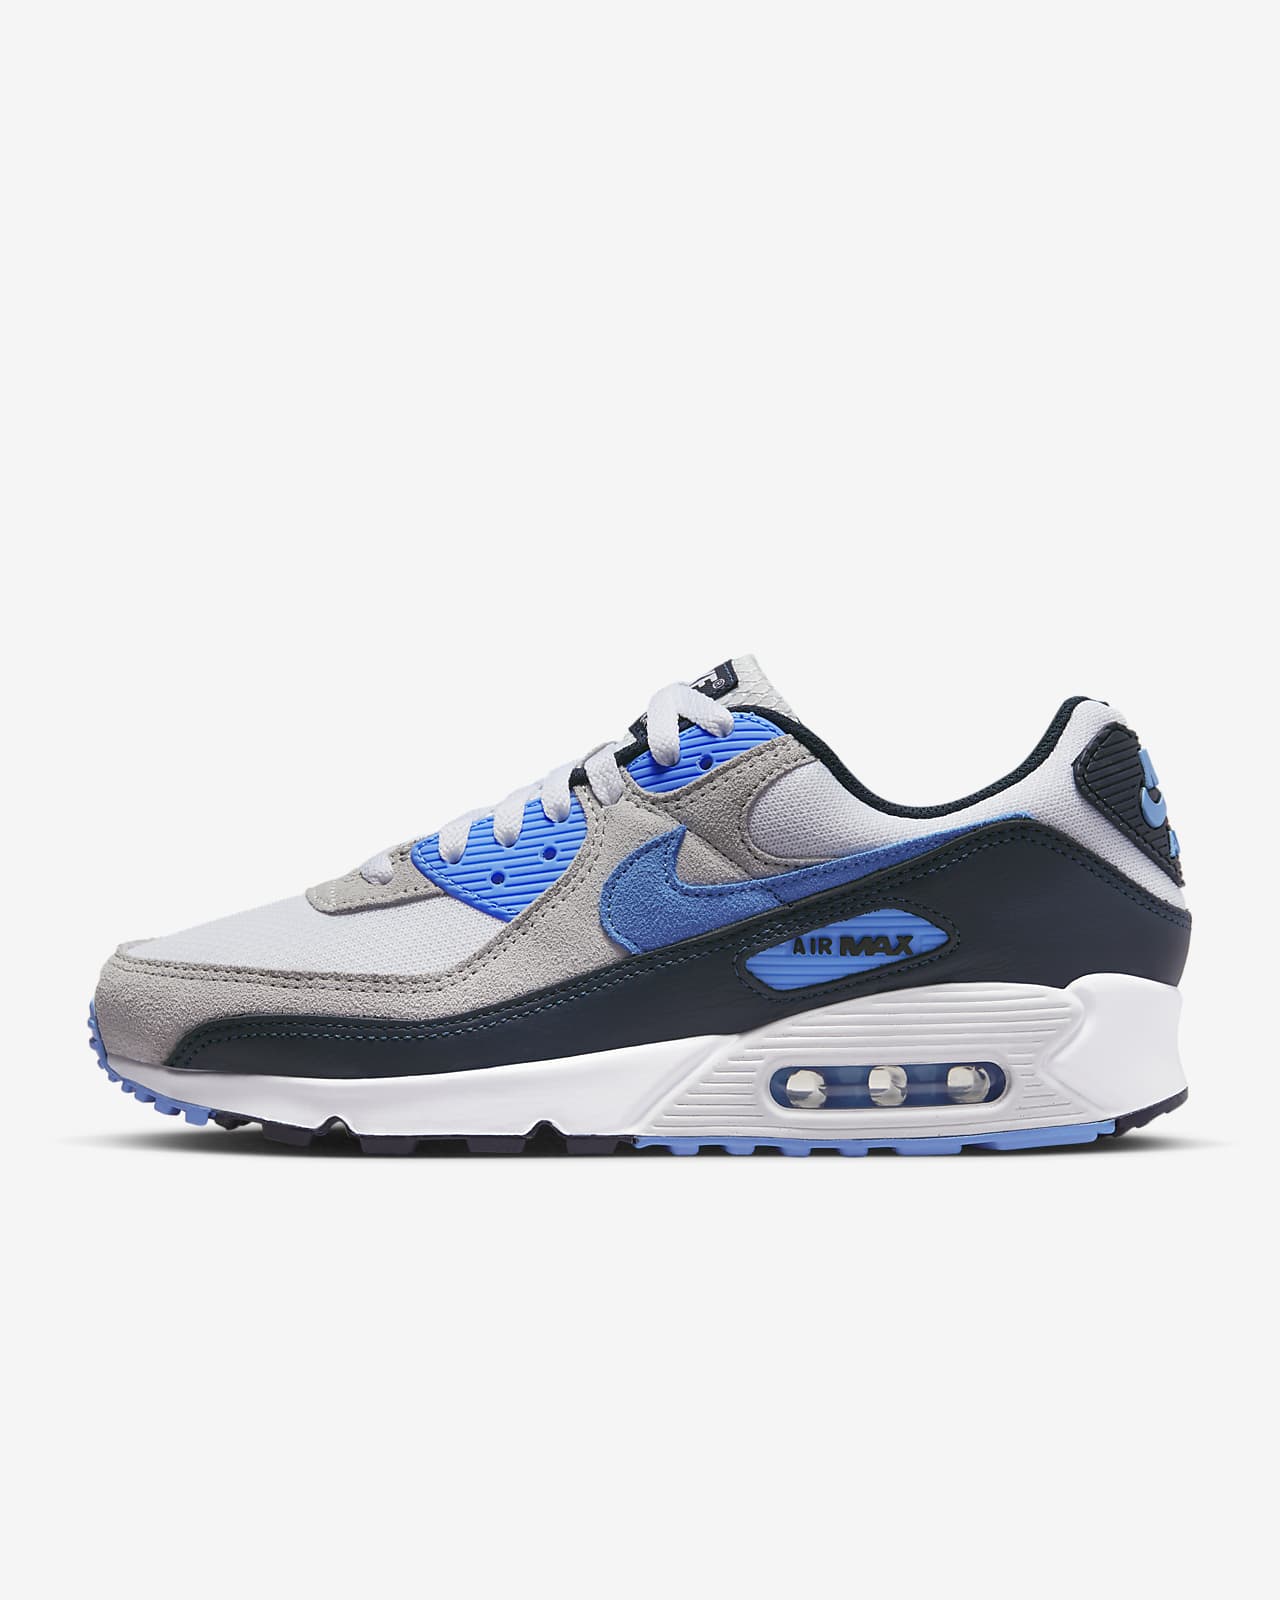 size 12 men's nike air max 90 shoes